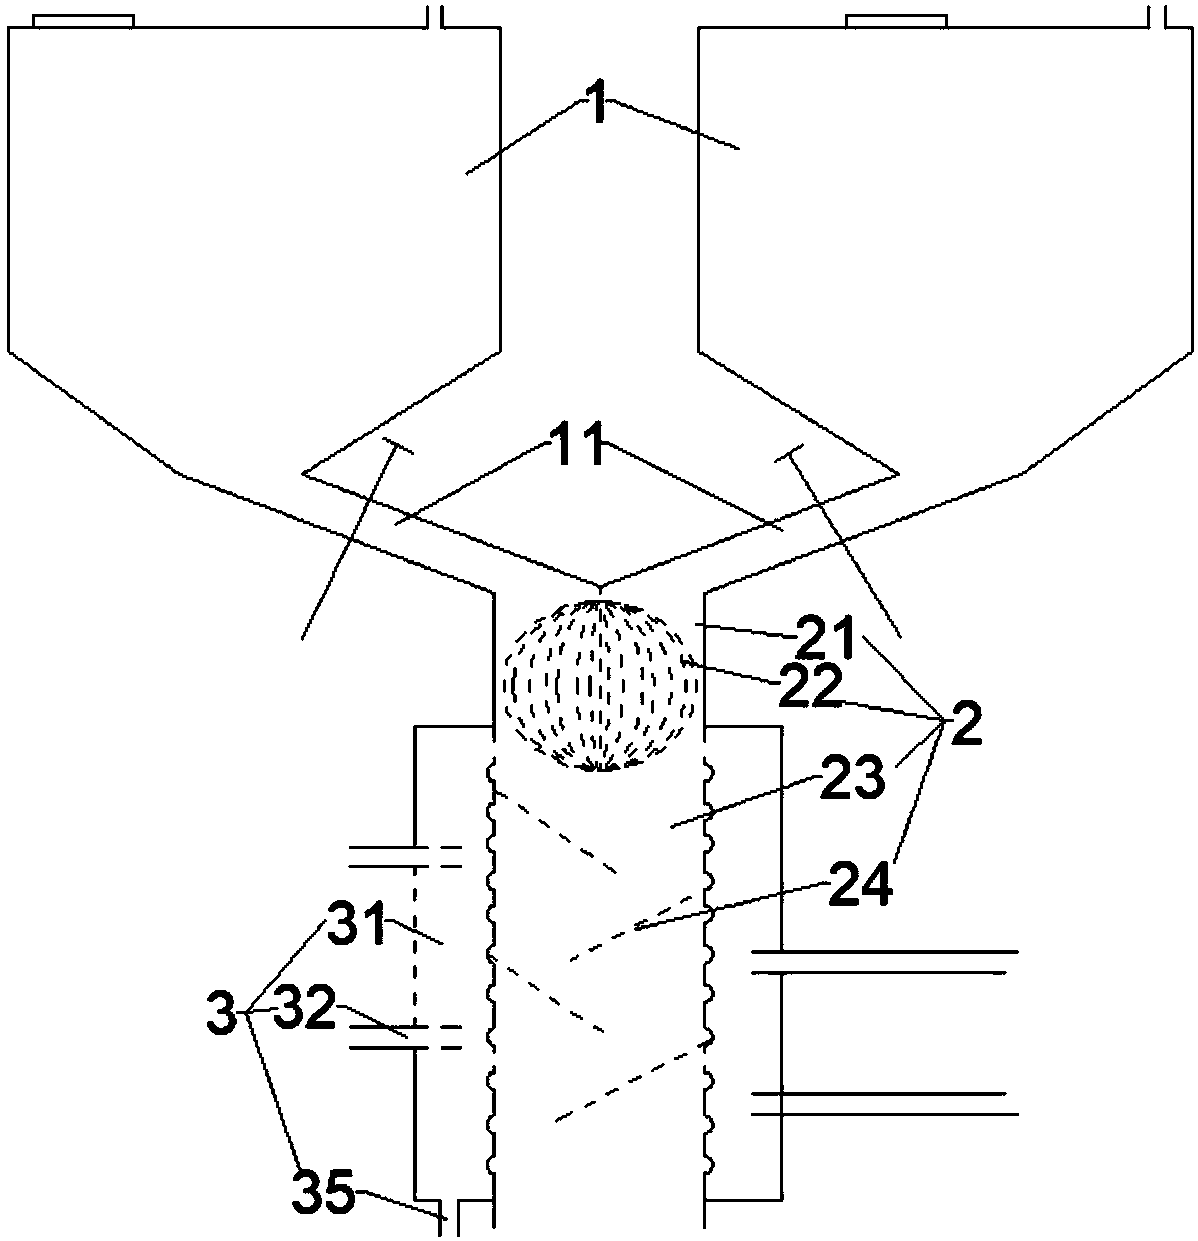 Energy-saving circulation system for mixing and smashing compound fertilizers